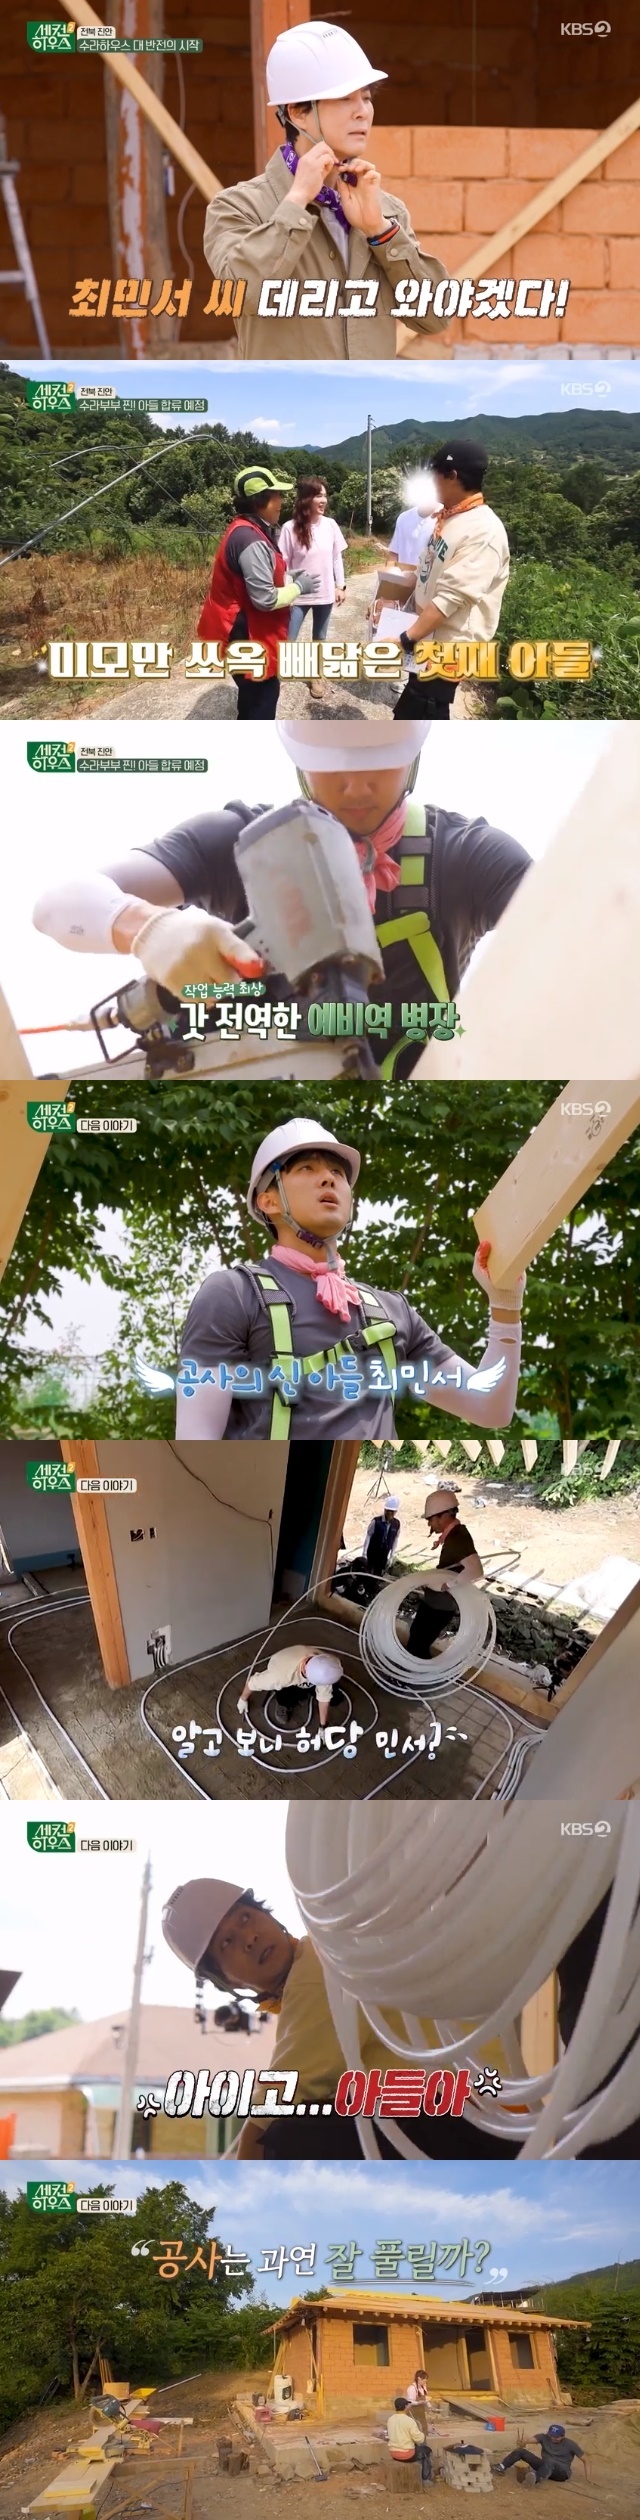 Choi Soo-jong Ha Hee-ra Couple summoned a sturdy son to work on a hard work day.In the 5th KBS 2TV entertainment second house broadcasted on June 29, Choi Soo-jong Ha Hee-ra Couple, who continues to build a second house in Jeonbuk Jinan, was portrayed.On this day, Choi Soo-jong gave a deep sigh to the overflowing work, saying, How do you do this? Im going to work with Ha Hee-ra.When Ha Hee-ra brought up the story of her eldest son, saying, I cant even bring Min-seo home, Choi Soo-jong suddenly decided, Ill bring Choi Min-seo once. Let her work.Choi Soo-jong Ha Hee-ra Couple, who started construction alone, was ready for safety.When Ha Hee-ra asked him to tie his apron, Choi Soo-jong said, Tie the strings or tie it with the rope of love? I tie you with the rope of my love.Choi Soo-jong tied a cold towel directly to his neck for Ha Hee-ra.What Couple had to do was to build a loess brick of about 12 kilograms per sheet.Choi Soo-jong, who had six bricks at a time, which is close to the weight of a bag, said, I will have to bring someone who works hard next time. However, the problem was discovered when a Korean carpenter neighbor visited.All the bricks that have been piled up for a long time have been piled up in reverse.Choi Soo-jong, Ha Hee-ra Couple started to tear and reattach the brick, but Choi Soo-jong made a mistake in the direction of Brick again from the middle and called Ha Hee-ras storm nagging.Ha Hee-ra, who made a loud voice, lamented, Whats up? And called it the age of Bricks Passion. Choi Soo-jong, who was tired of building Brick again for the third time, said, Lets not build a Brick house from now on.It would be better to build it with wood, he lamented.In the trailer, Couple actually brought his son to the construction mate and focused his attention. The villagers praised the sons warm-hearted appearance as I am full of son and I am very Bungeo-ppang with my father.Choi Soo-jong said, Teacher, teacher.Choi Soo-jong, Ha Hee-ra and his eldest son, Kimi, attracted the attention of viewers.